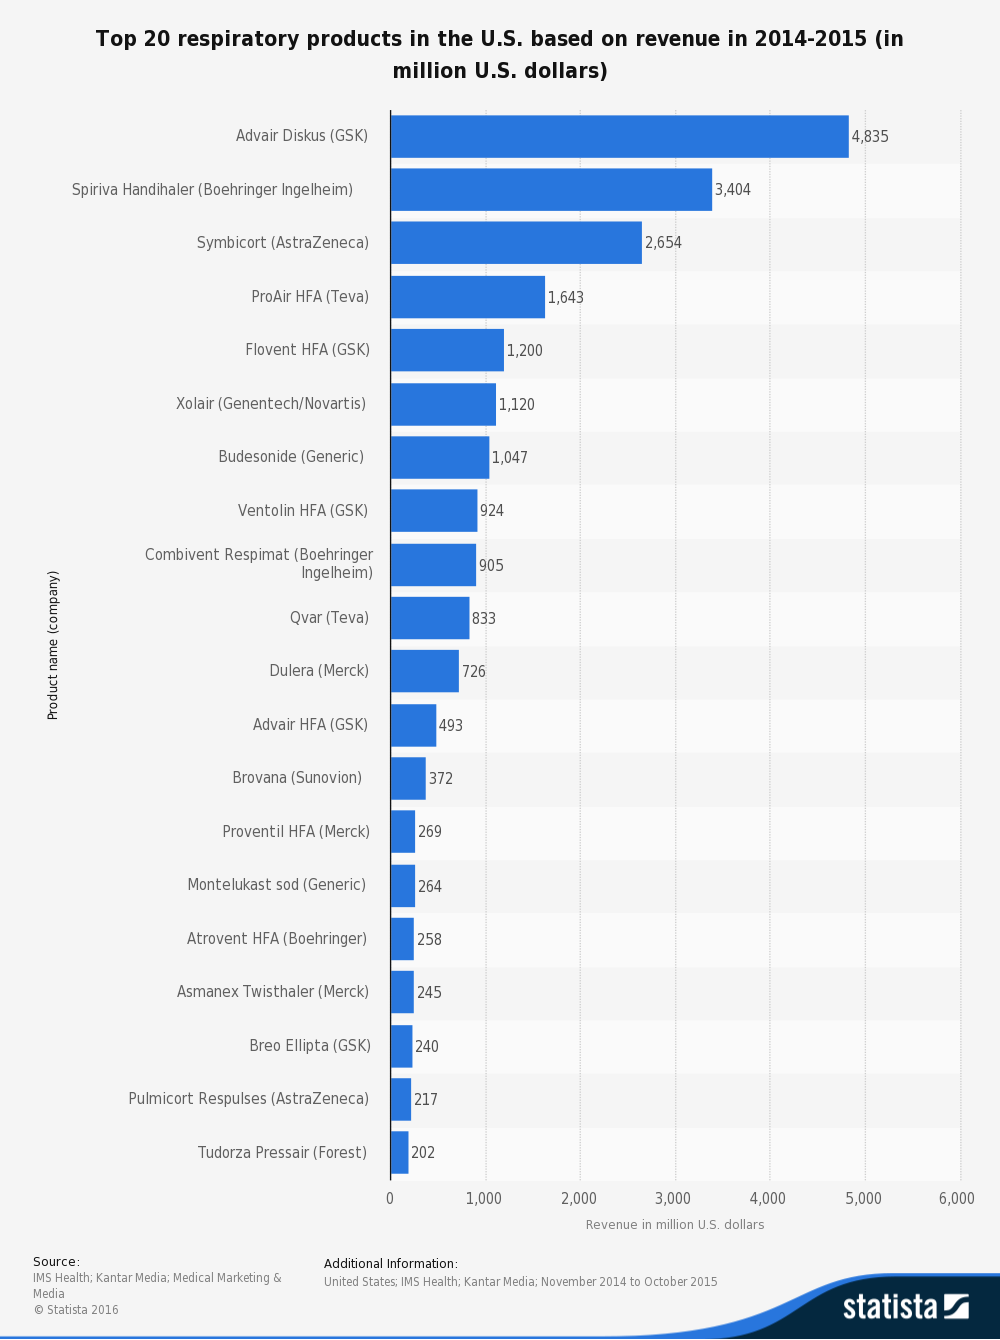 Top 20 respiratory products in the U.S. based on revenue in 2014-2015 (in million U.S. dollars)